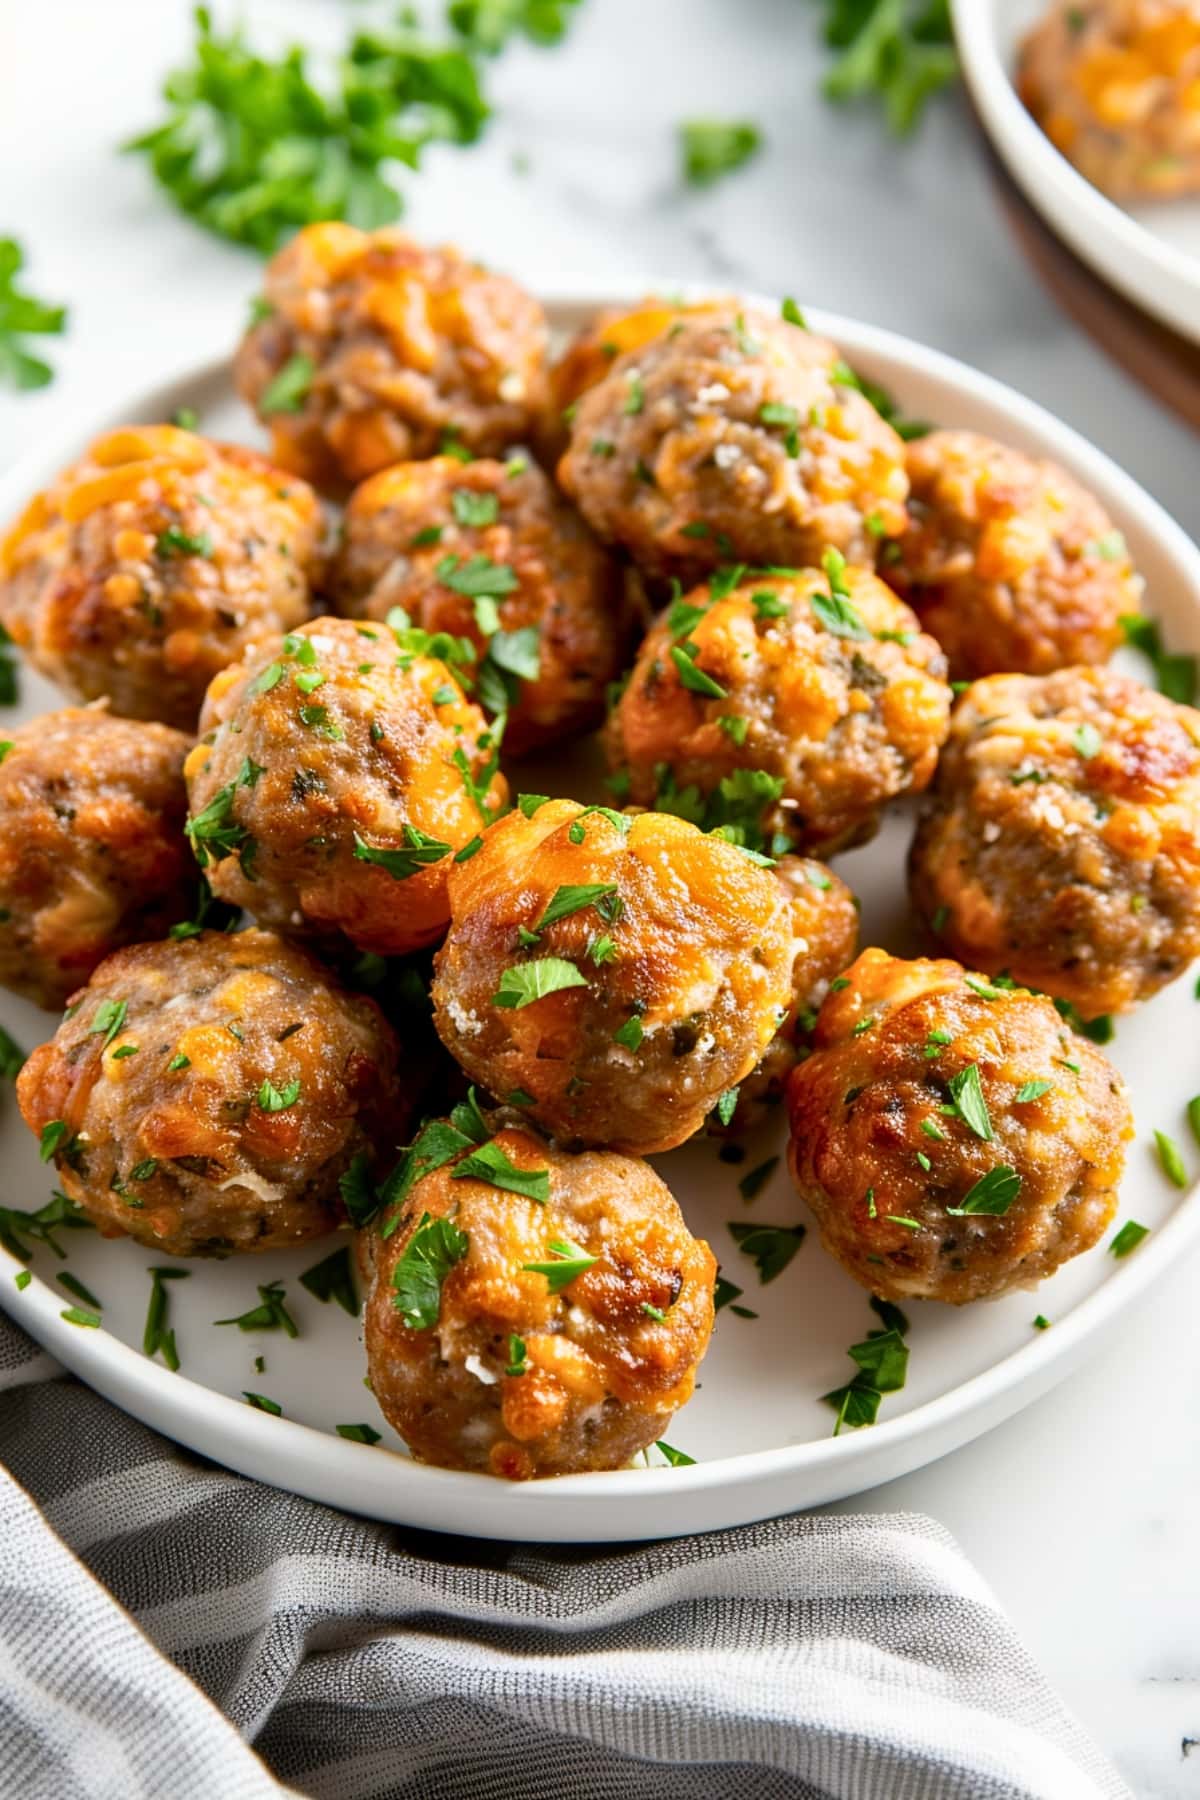 Bunch of sausage balls in a plate garnished with chopped parsley.